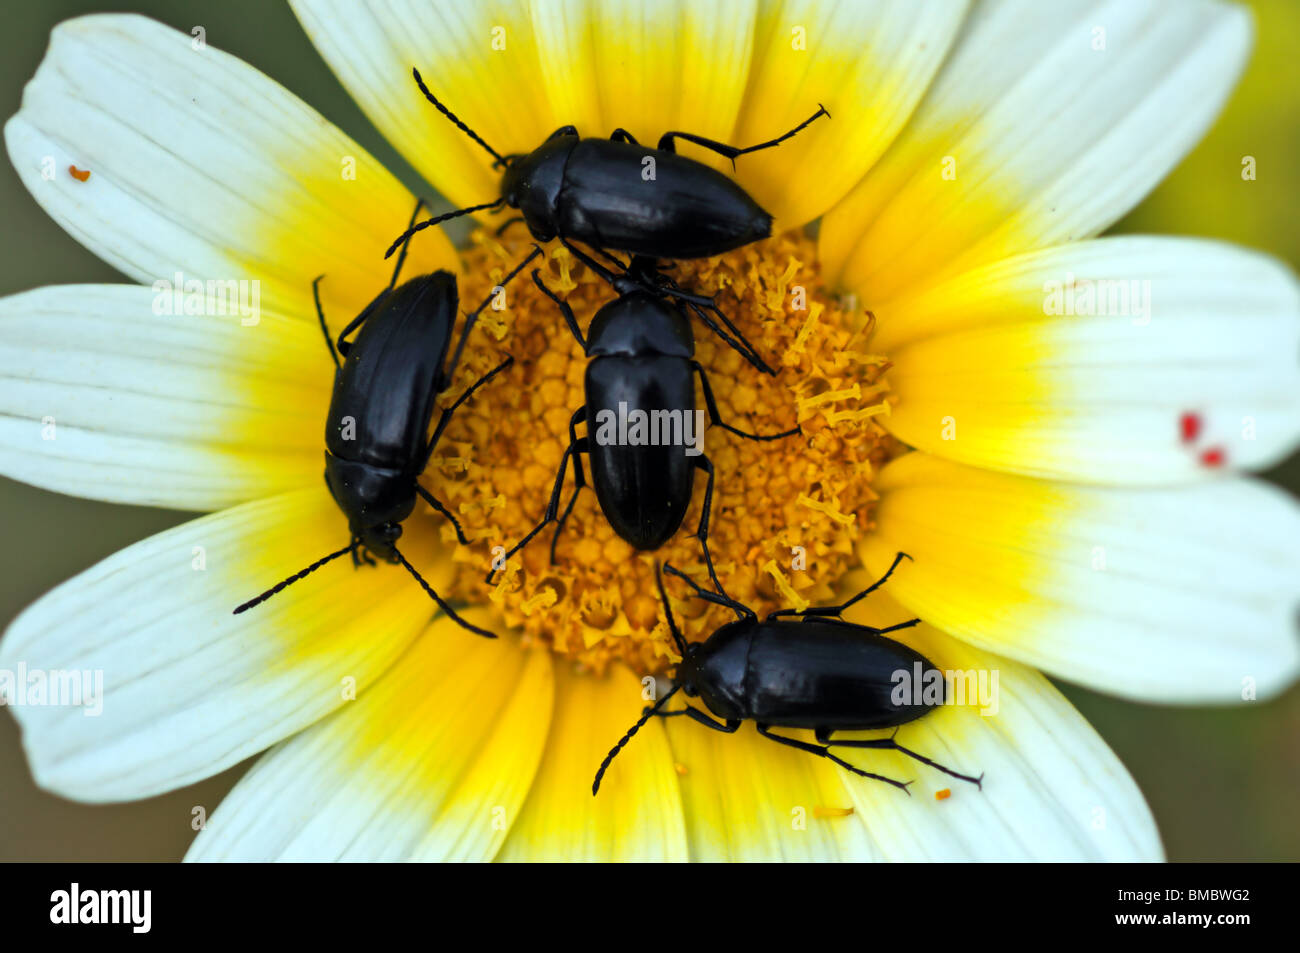 Small insects on a blooming flower. Stock Photo